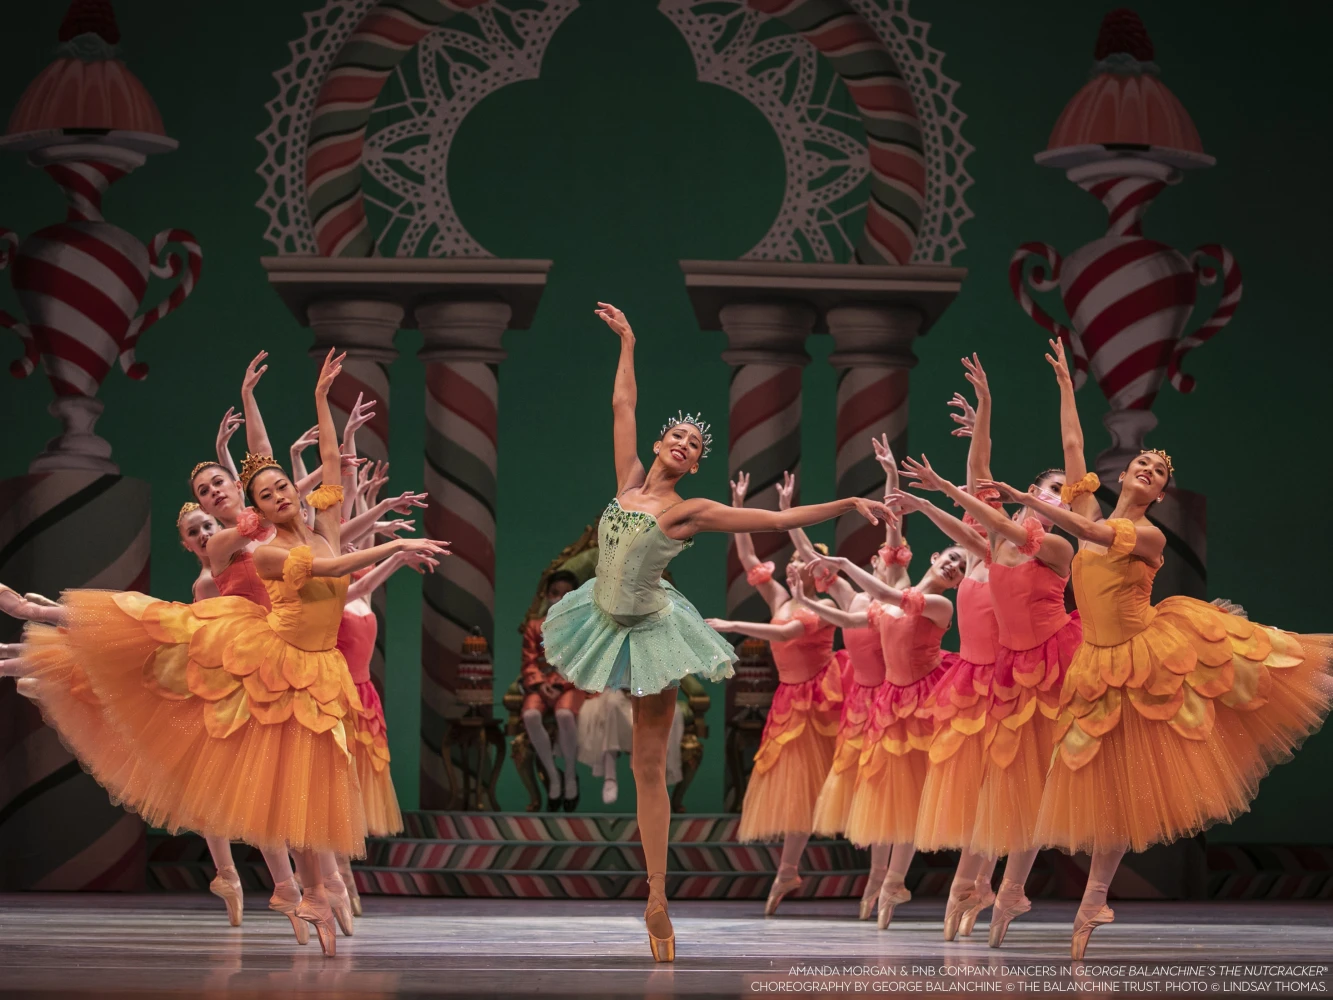 George Balanchine’s The Nutcracker: What to expect - 2